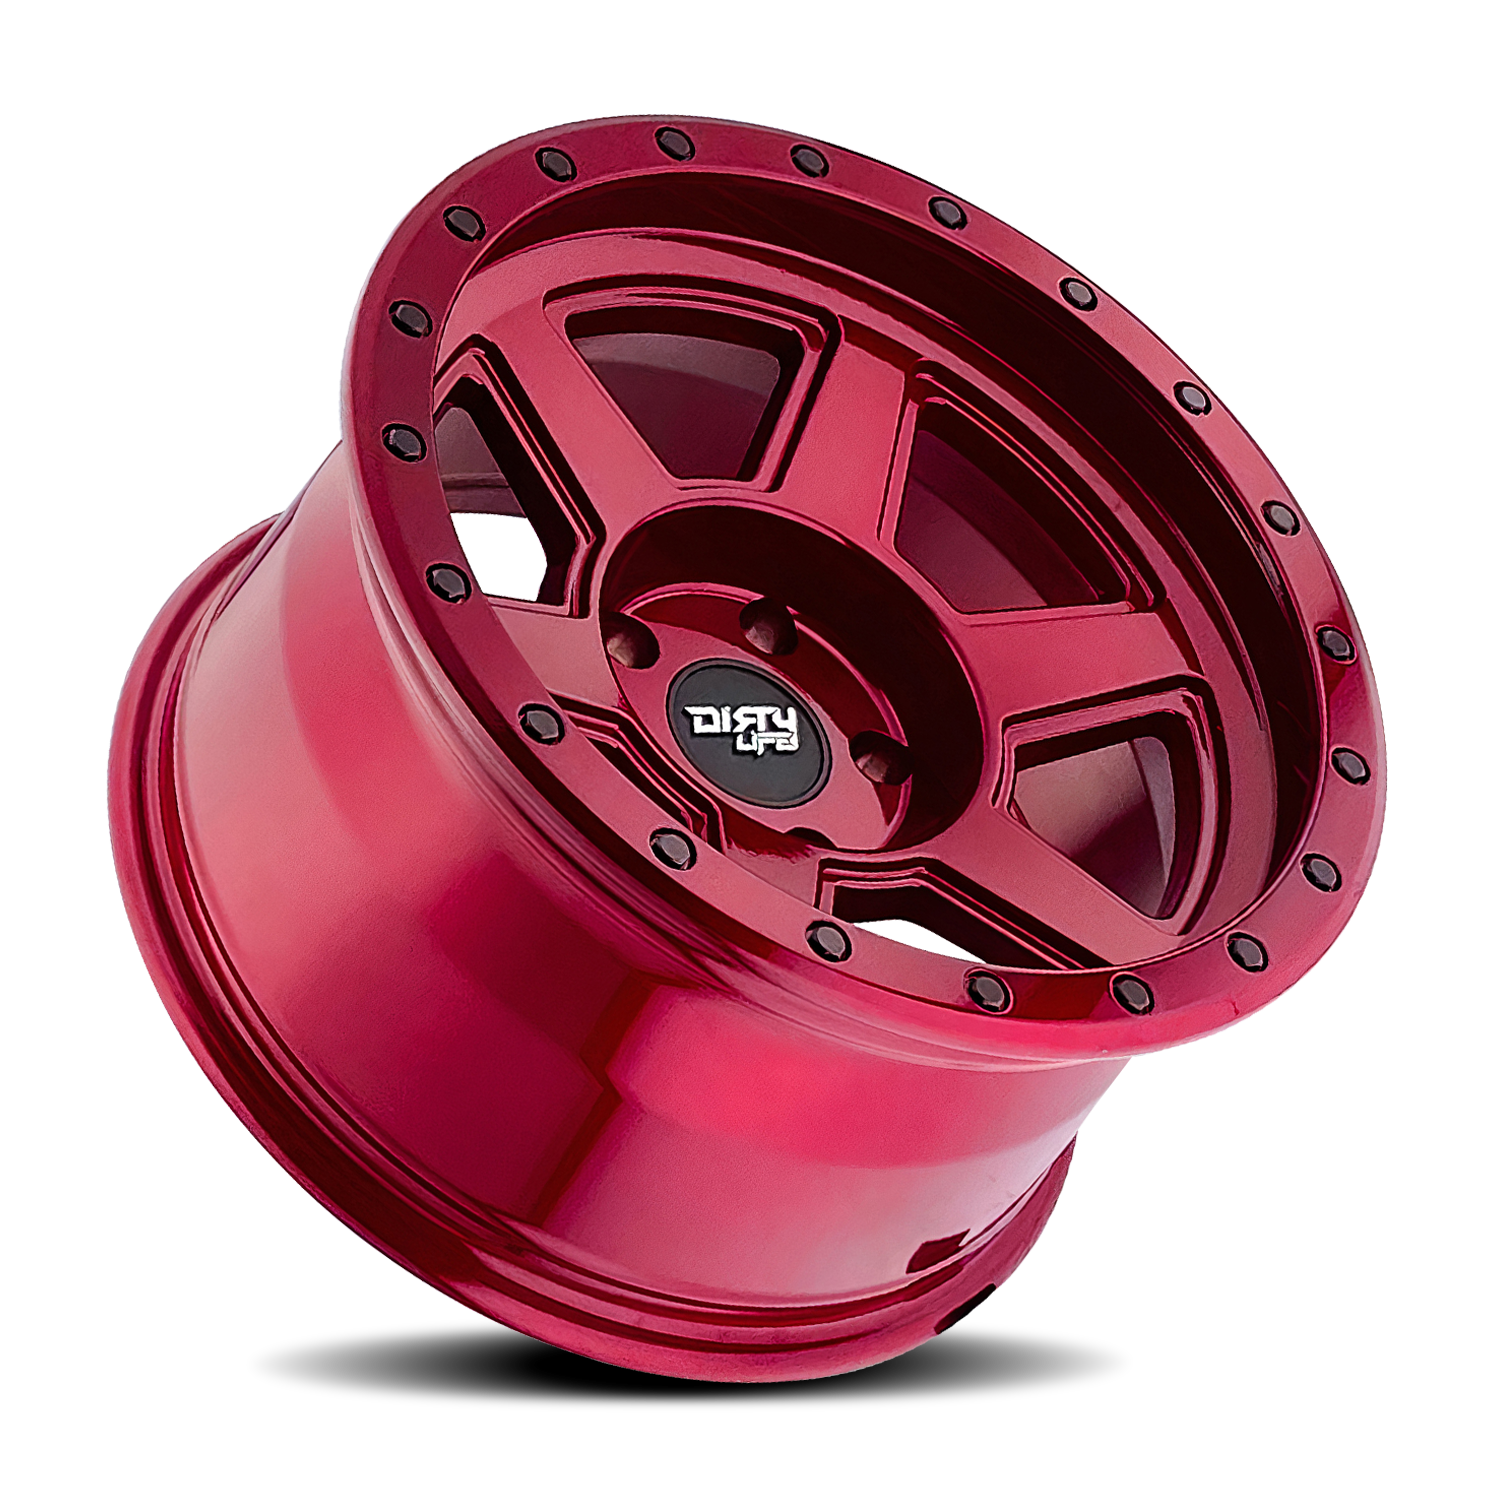 Dirty Life COMPOUND Gloss crimson candy red 17x9 -12 6x135mm 87.1mm